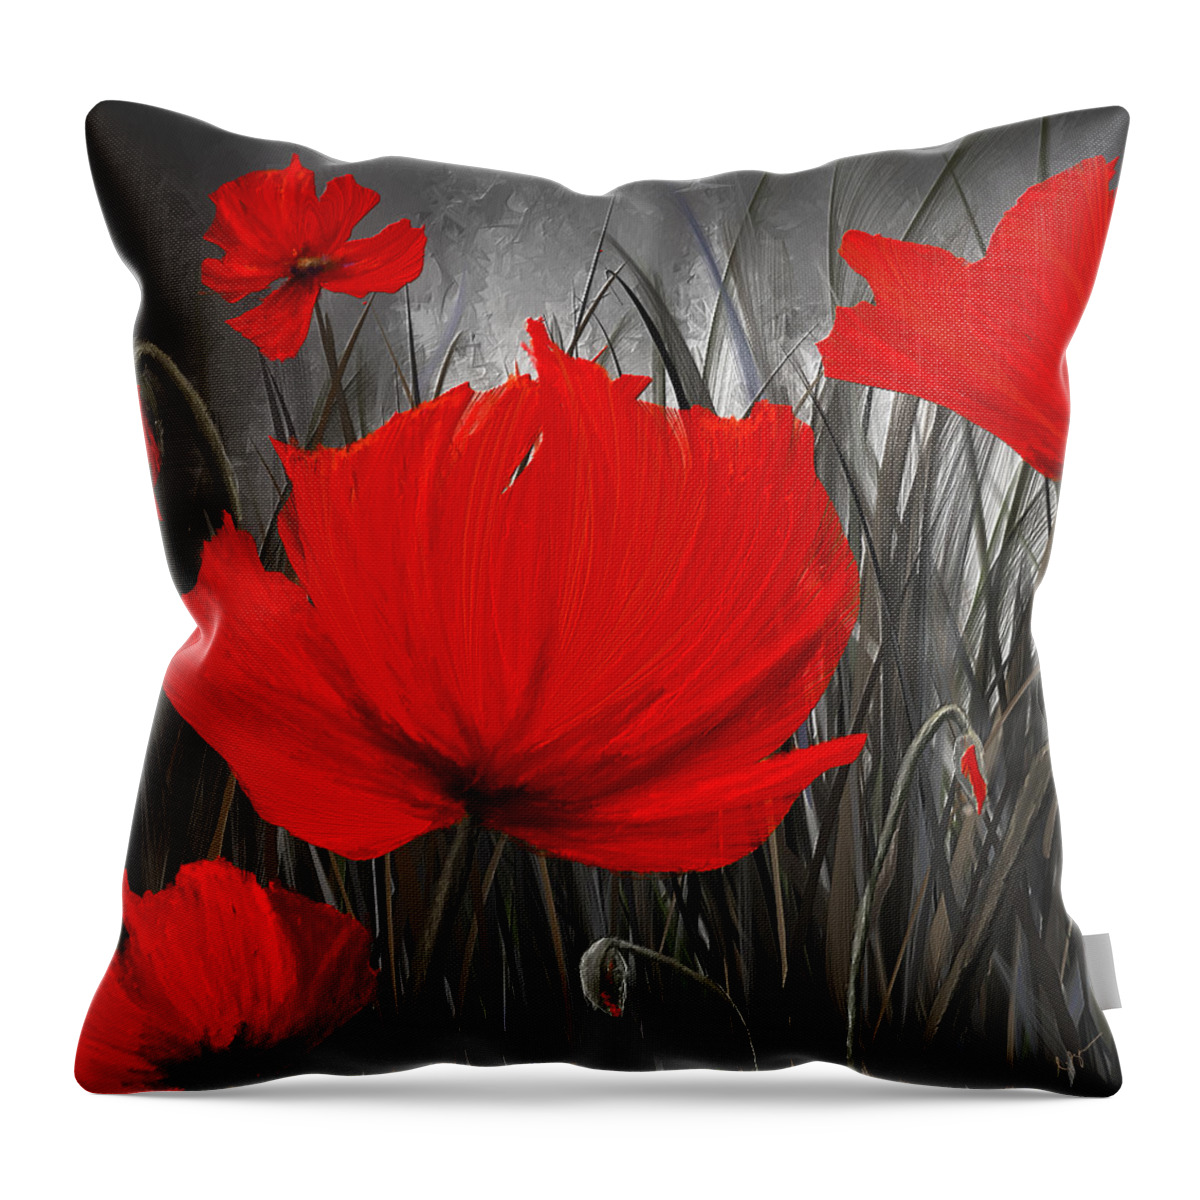 Poppies Throw Pillow featuring the painting Blood-Red Poppies - Red And Gray Art by Lourry Legarde